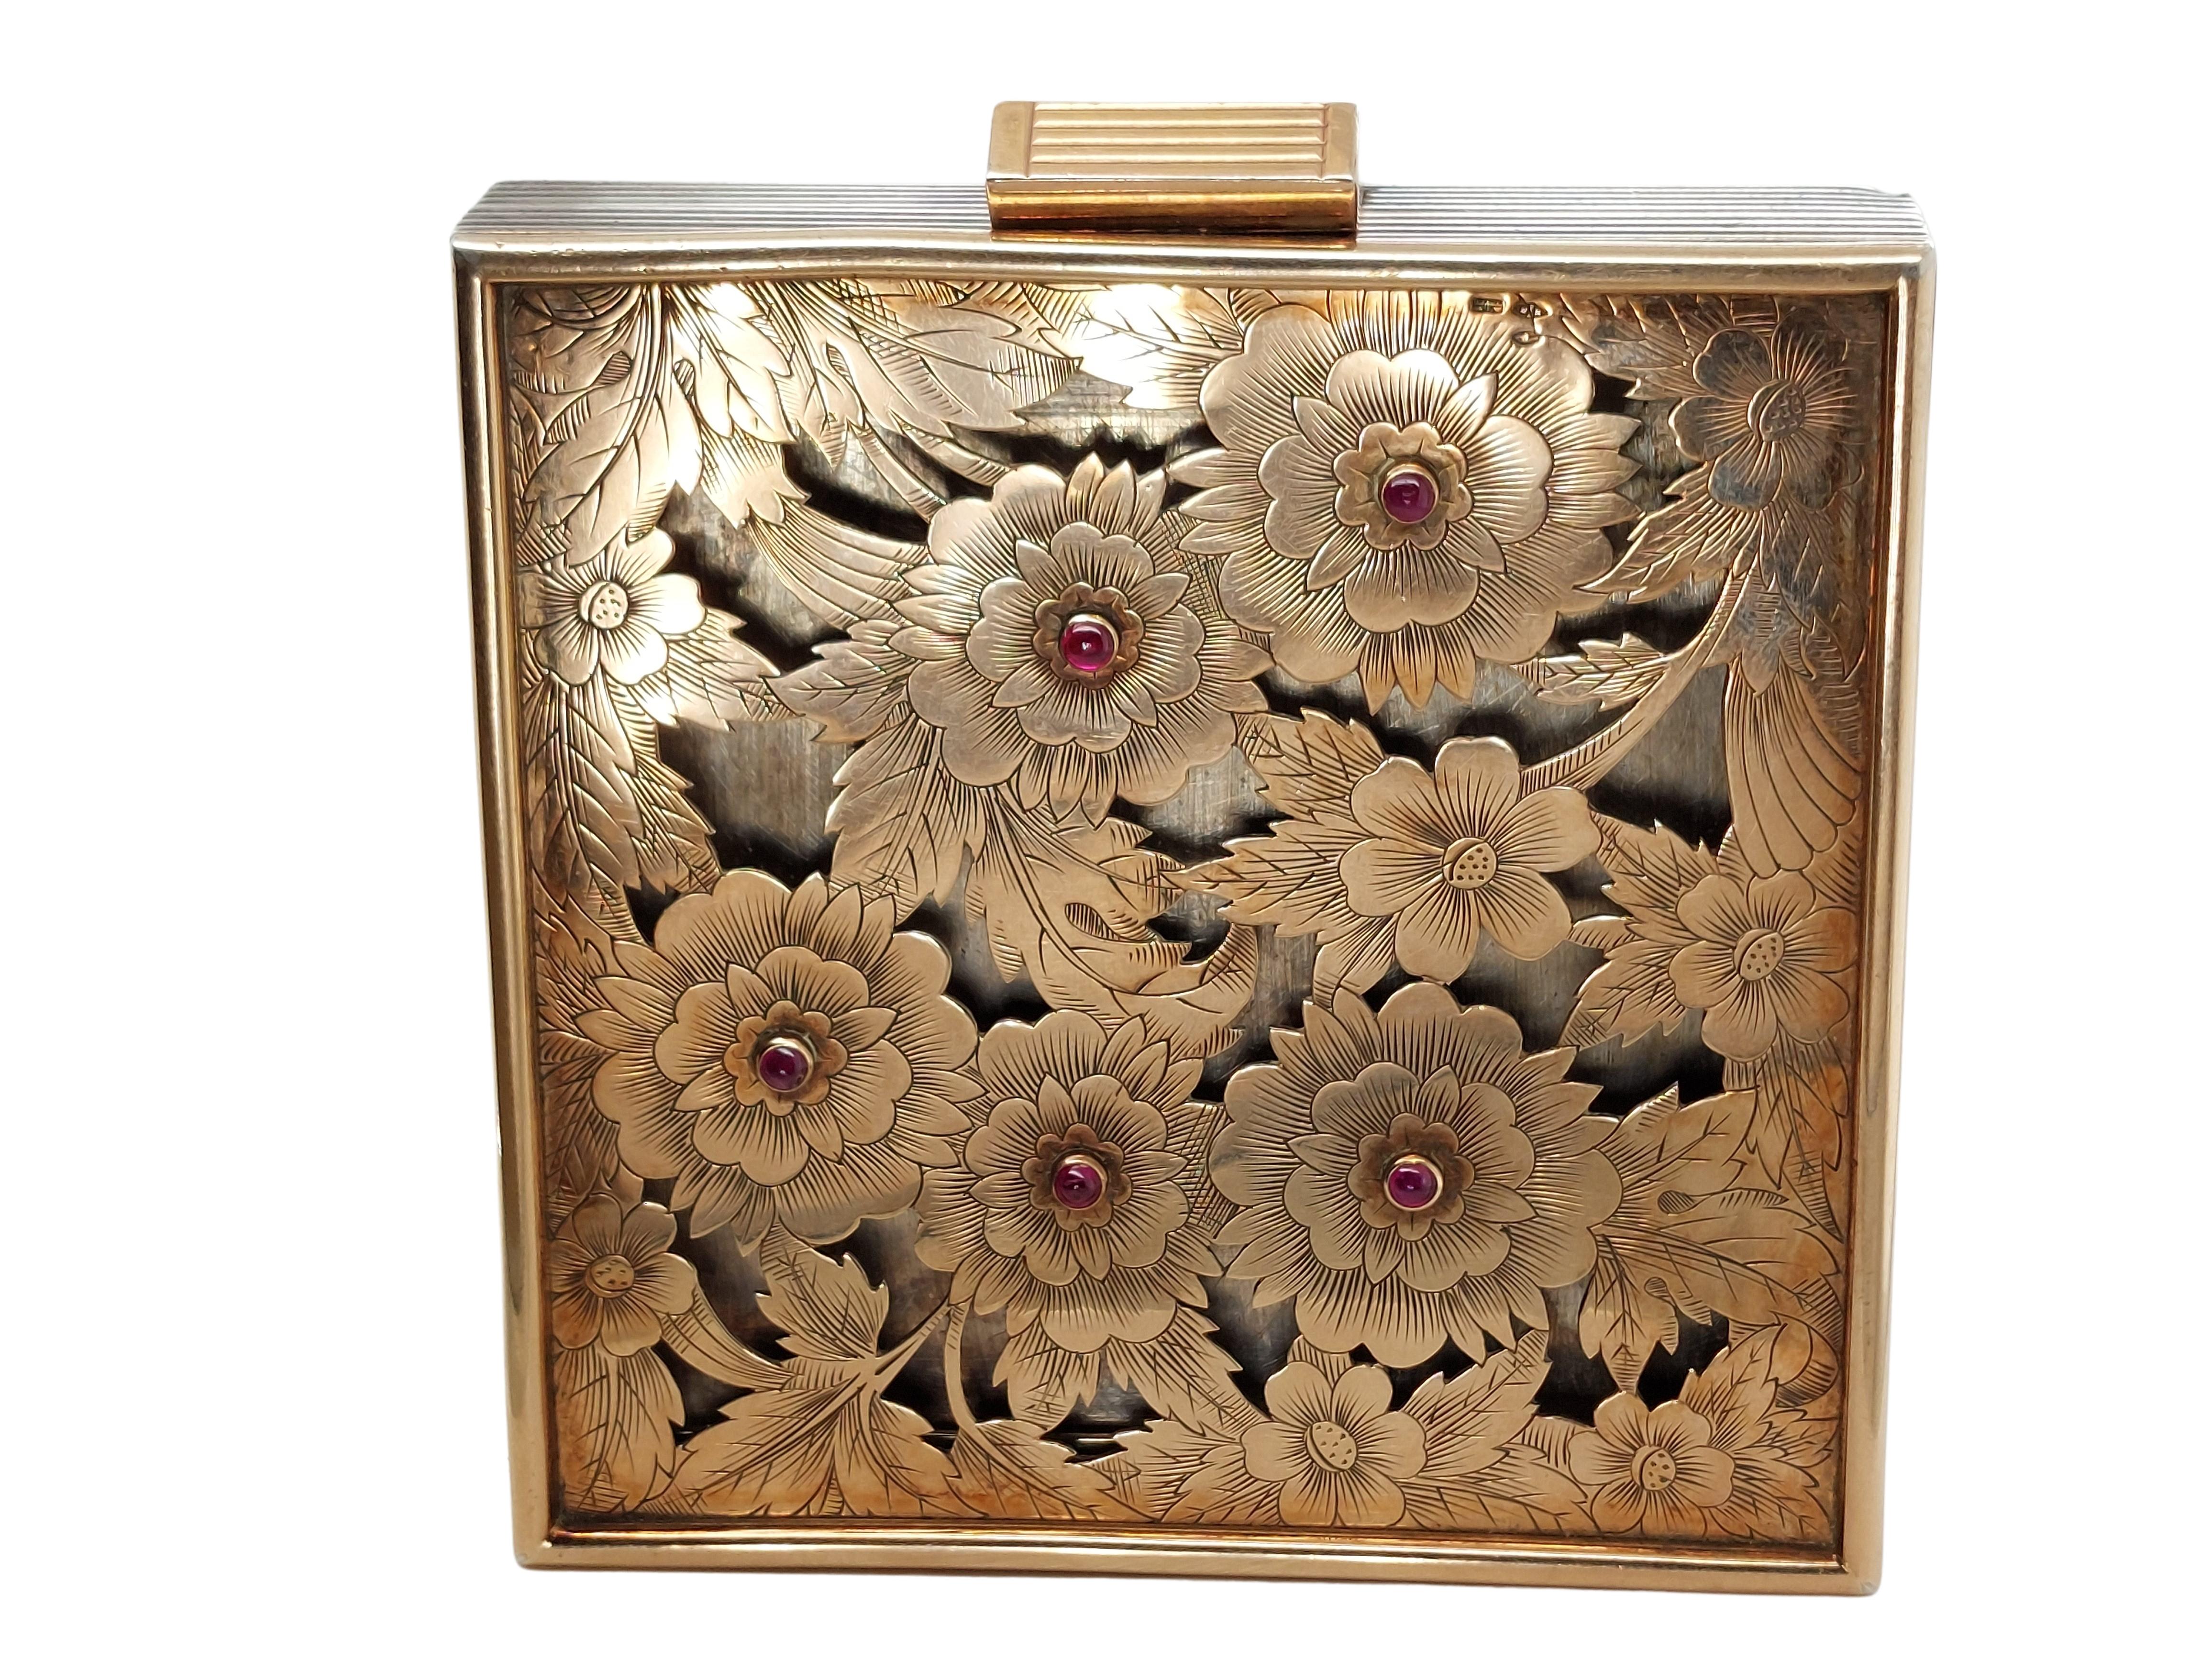 Vintage Boucheron Gold and Silver Minaudiere Clutch 

Boucheron, 18 karat rose gold and sterling silver Minaudiere, studded with cabochon-cut rubies. The top of this opulent purse is 18 karat gold, pierced and engravings surrounded by ruby-studded